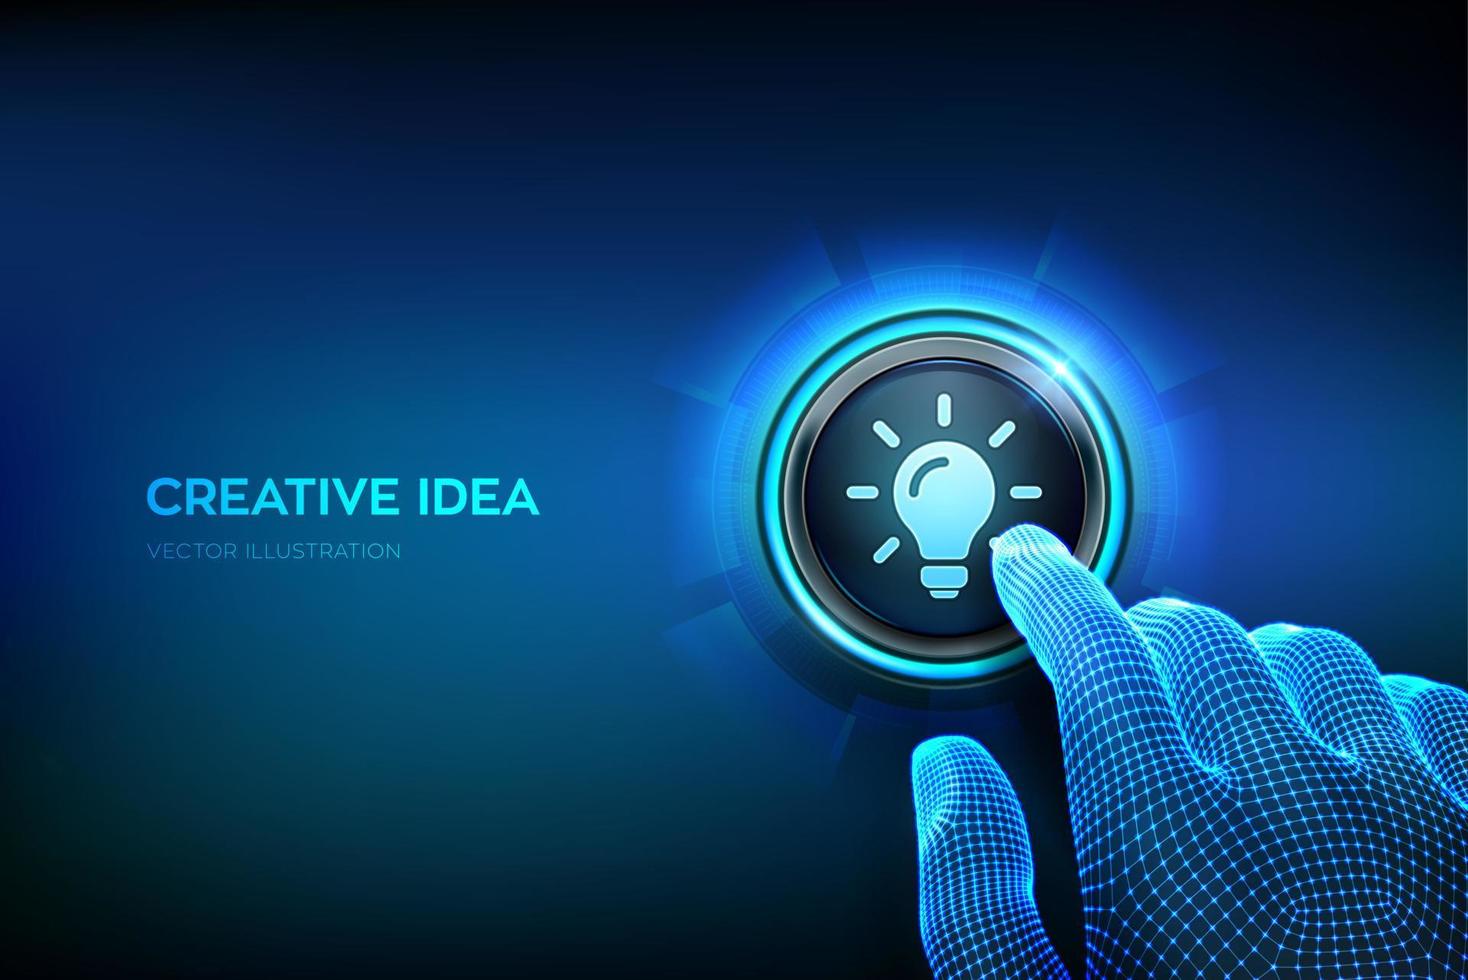 New idea. Creative Idea lamp icon. Creativity, innovation and inspiration modern technology and business concept. Closeup finger about to press a button. Just push the button. Vector illustration.